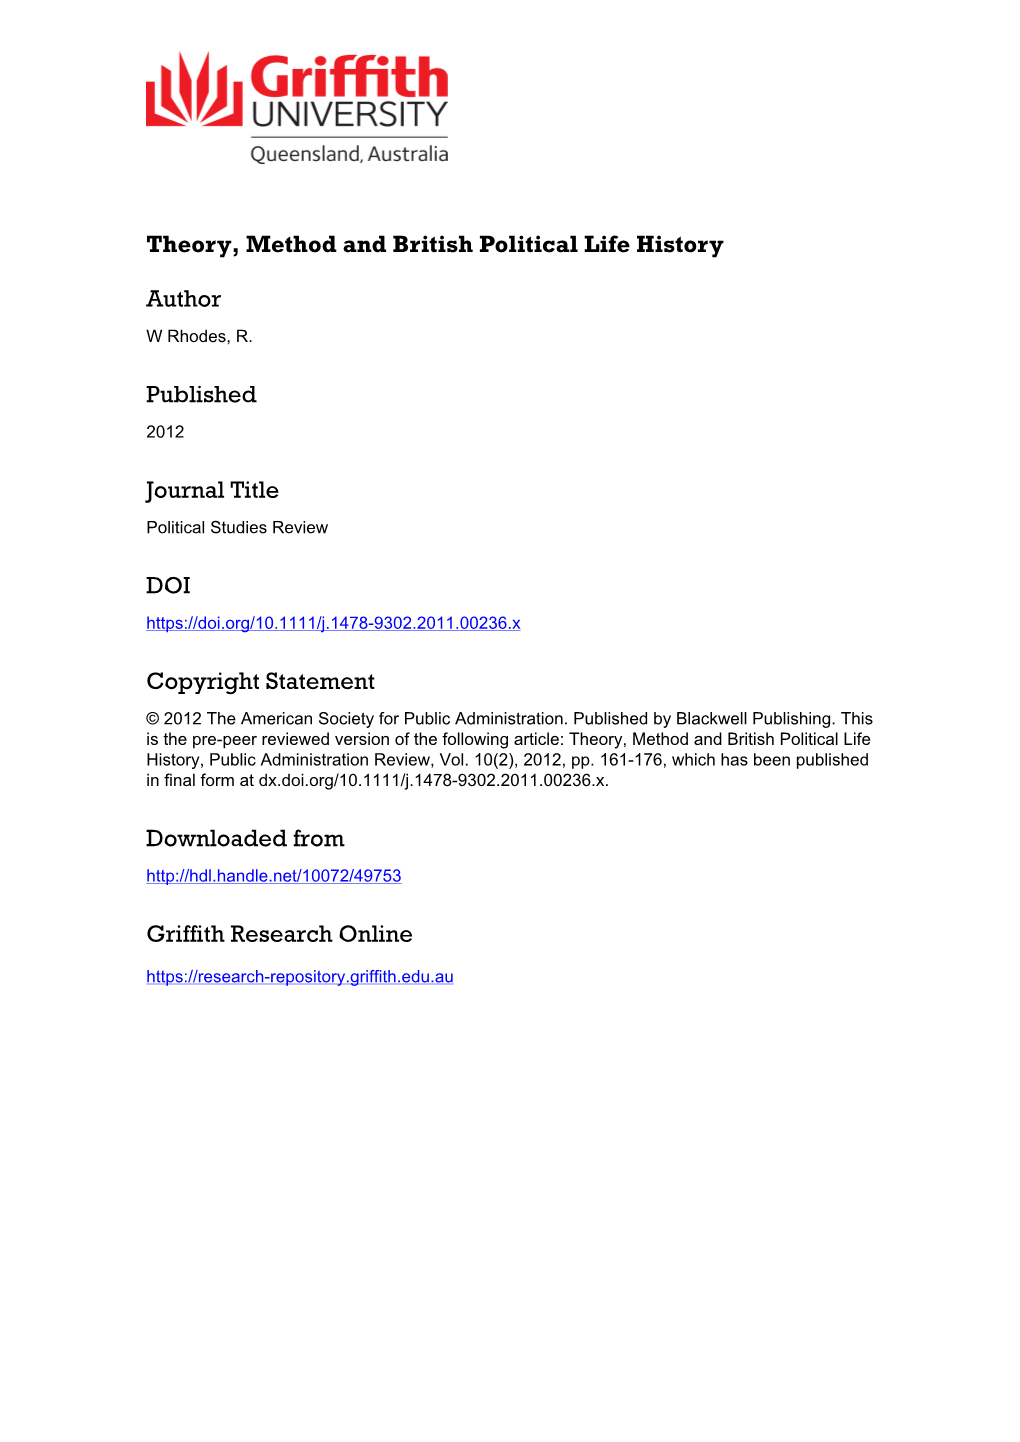 1 Theory, Method and British Political